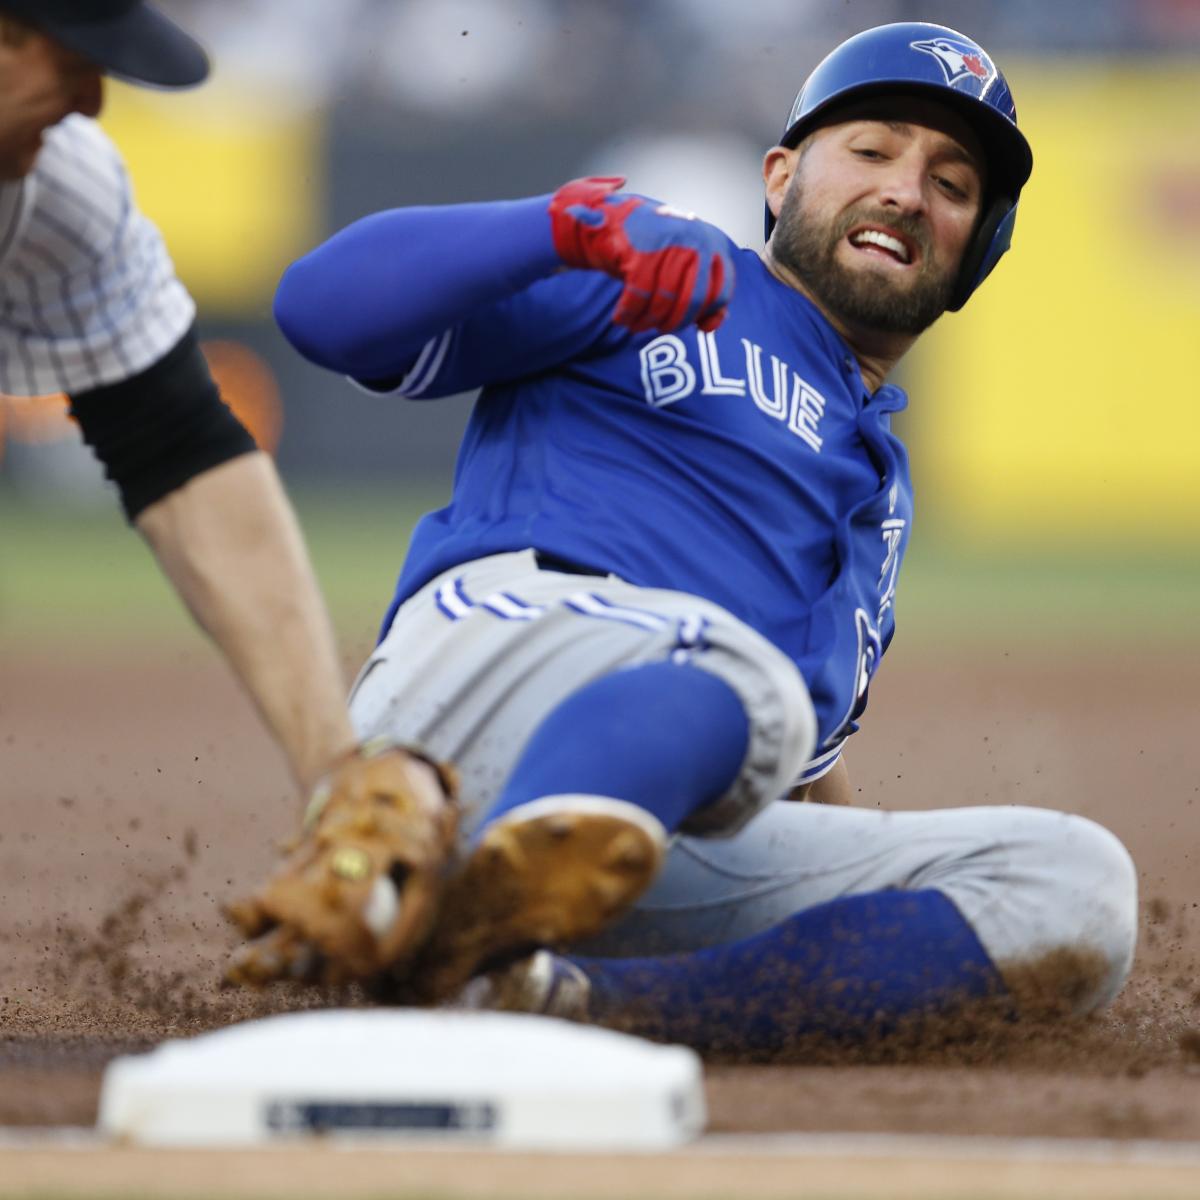 Kevin Pillar, Blue Jays Apologize for Slur Used When Shouting at